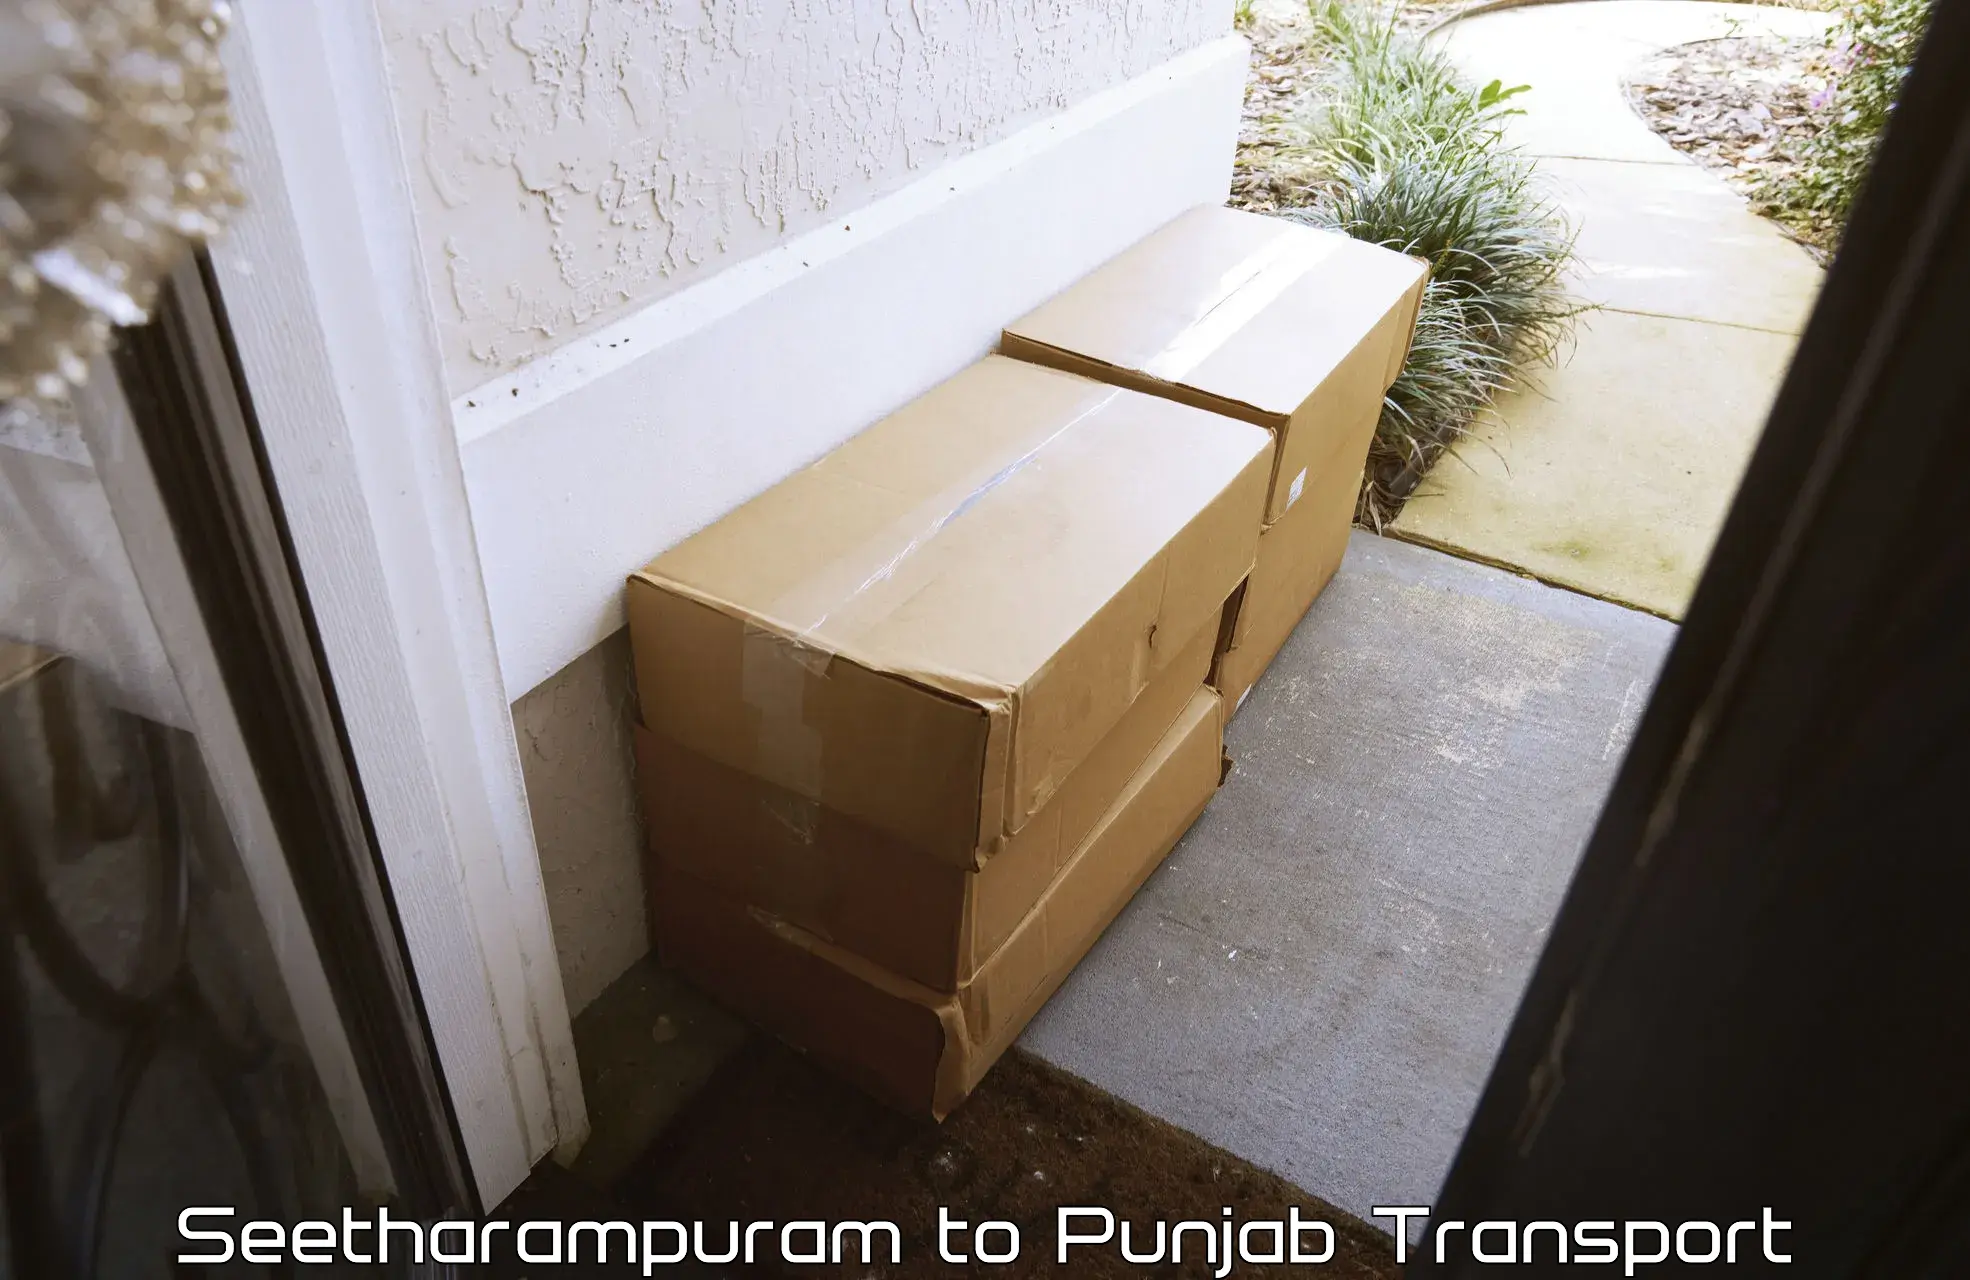 Transport bike from one state to another Seetharampuram to Punjab